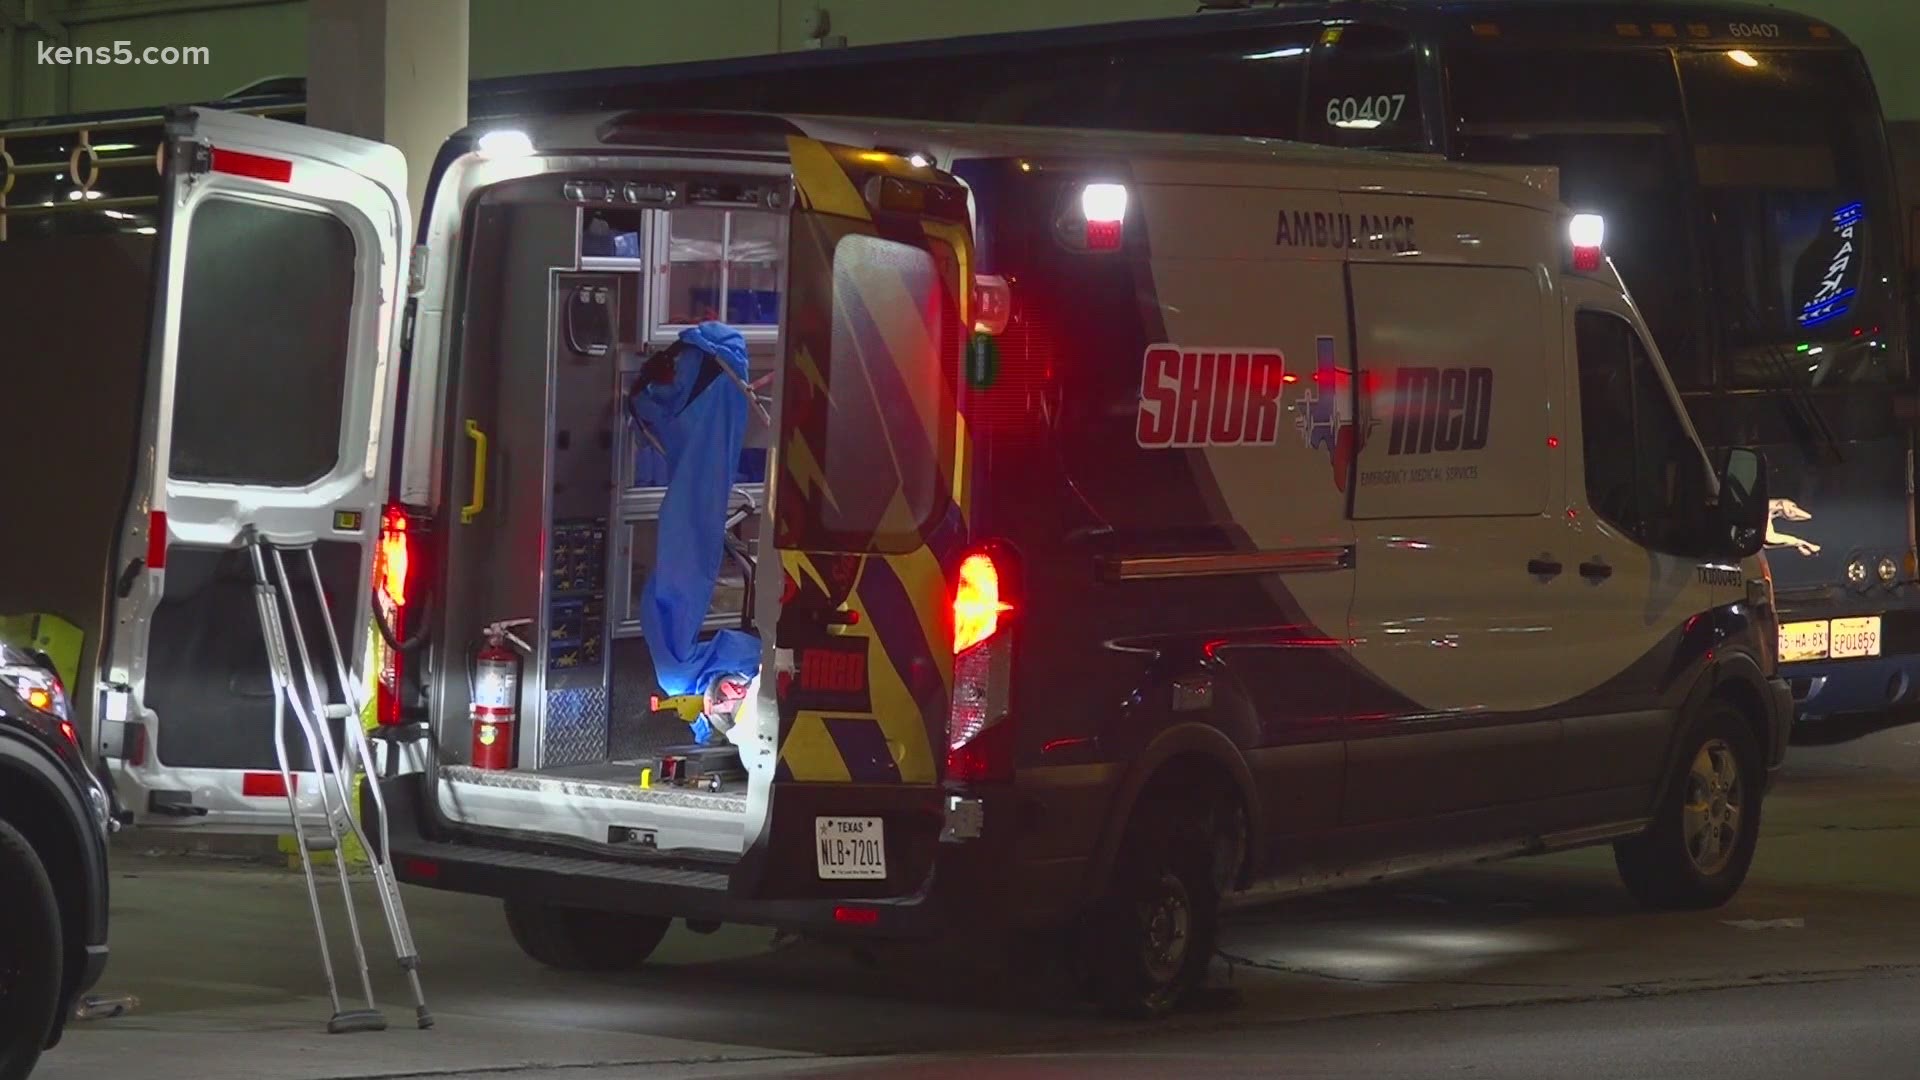 After getting out of the hospital, the suspect got into the ambulance that was outside and unattended and took off.